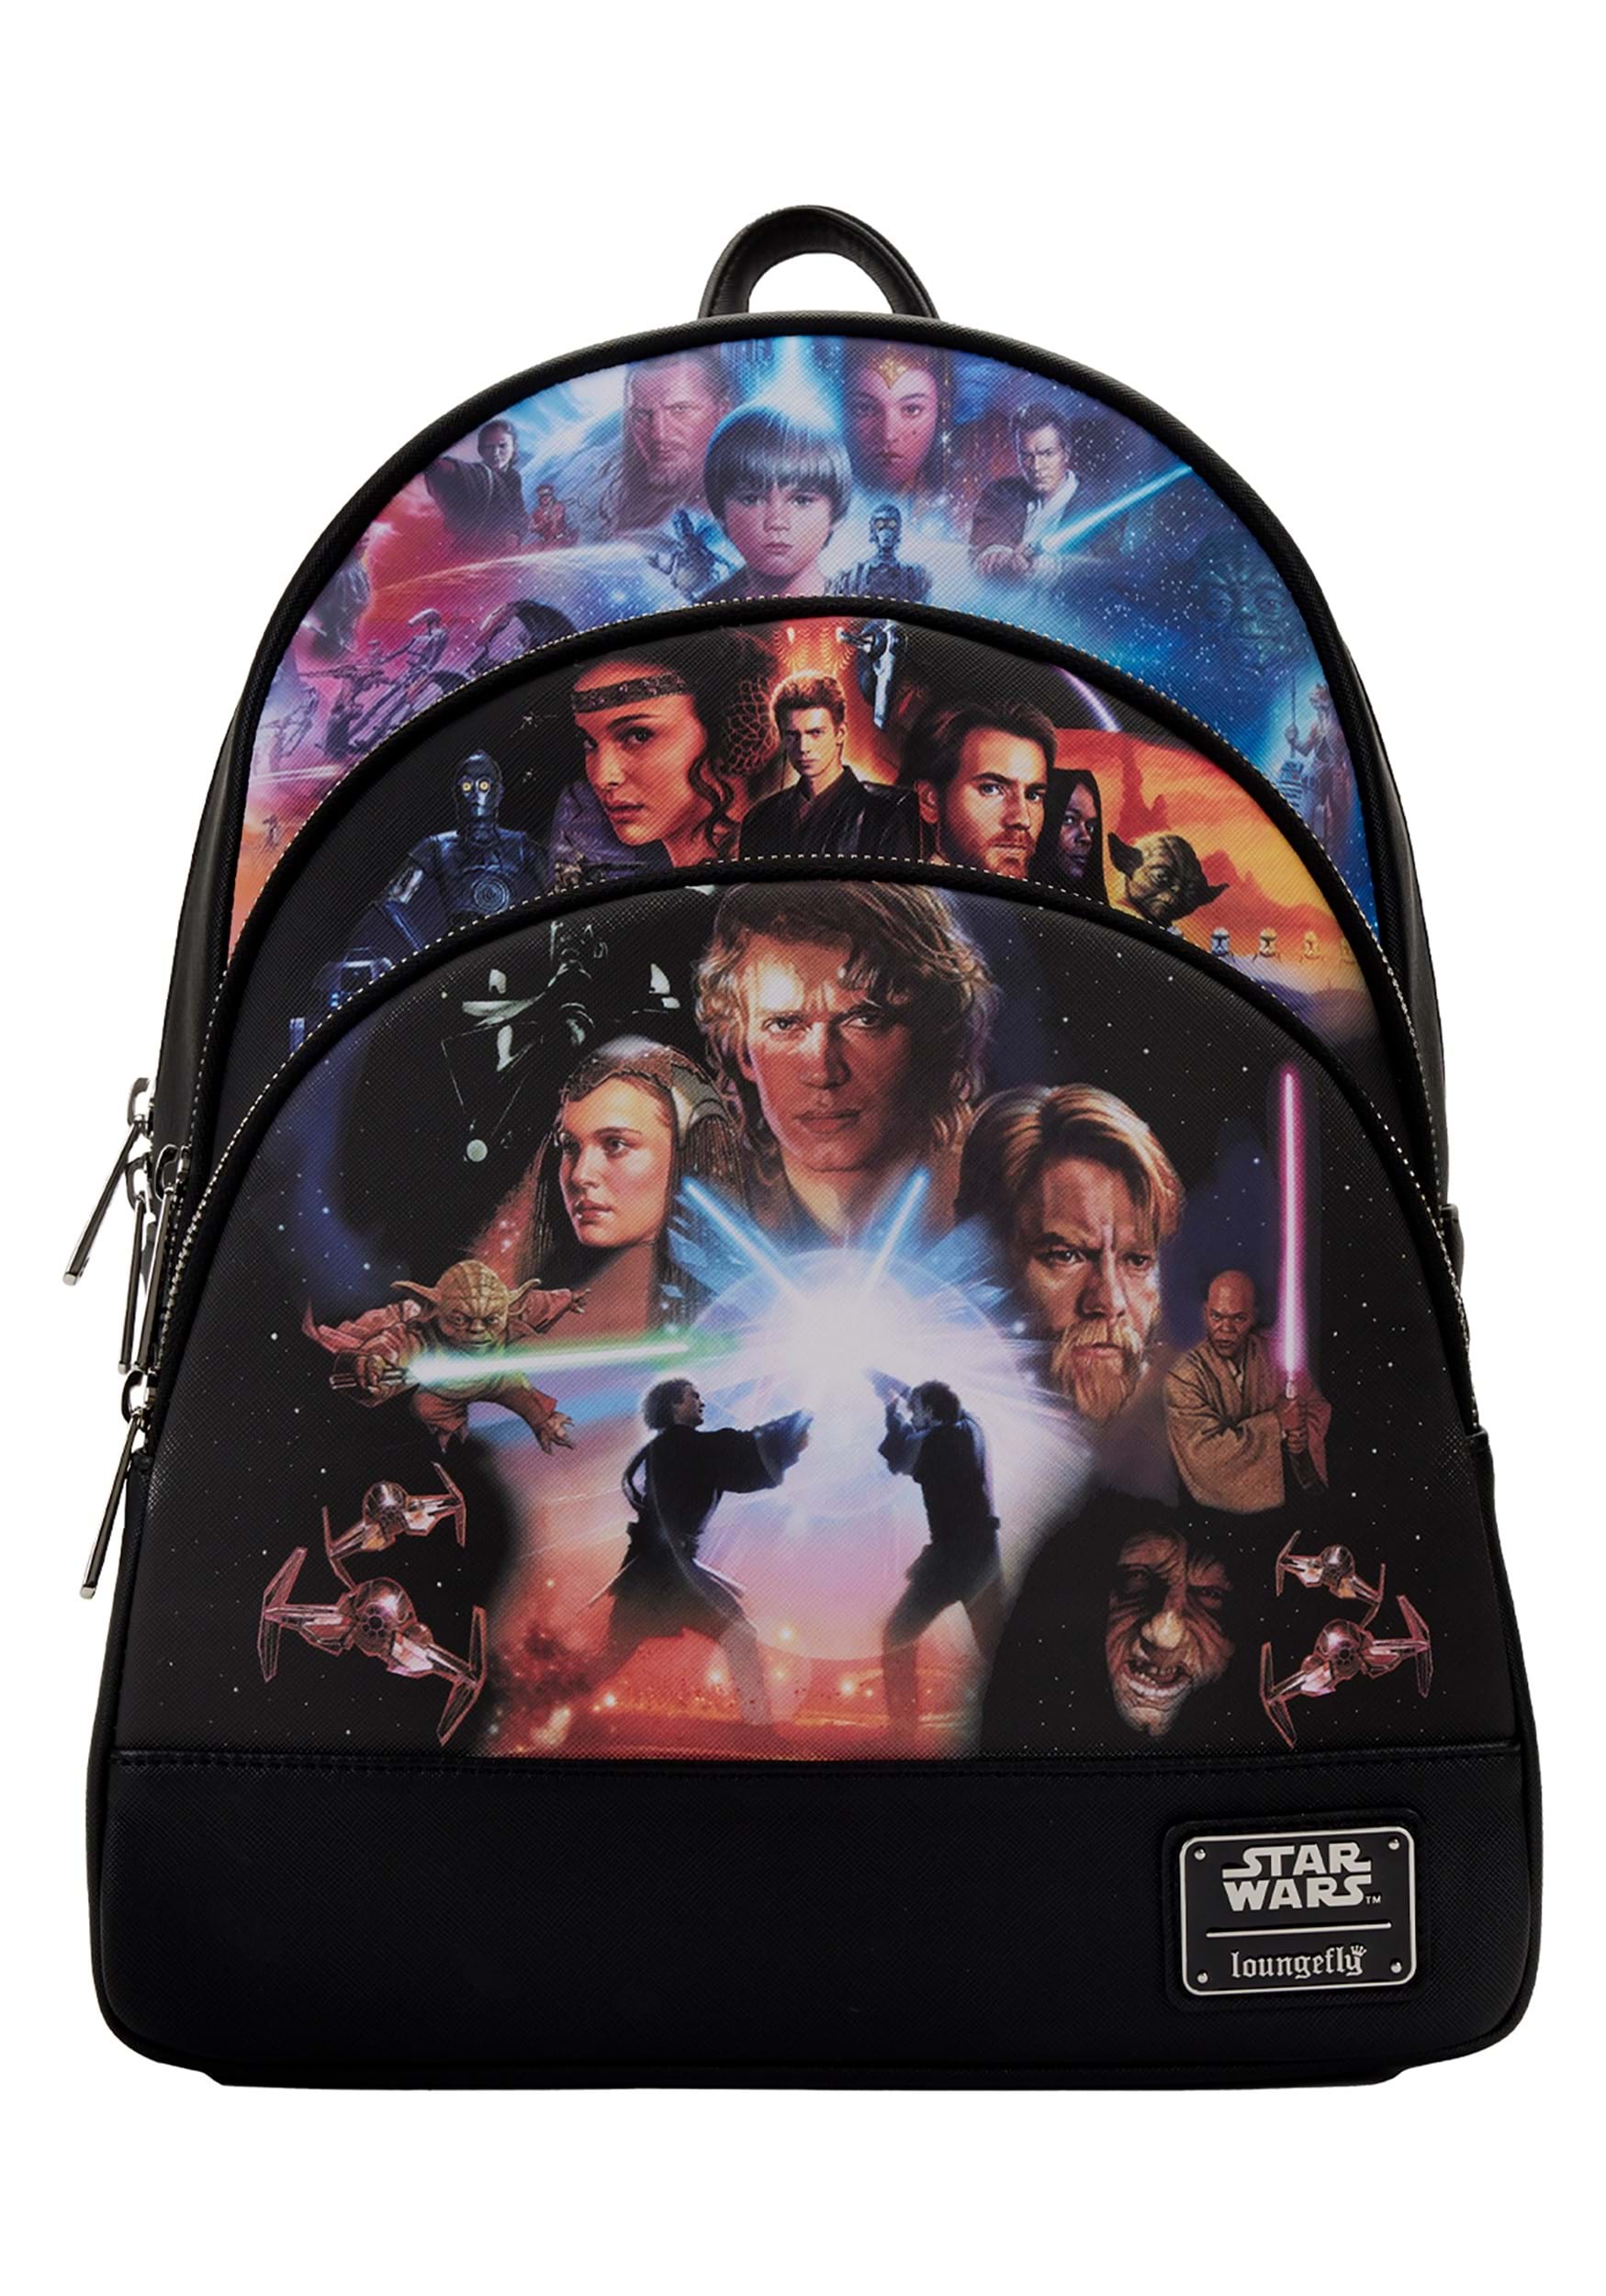 Star Wars Trilogy 2 Triple Pocket Mini Backpack From Loungefly